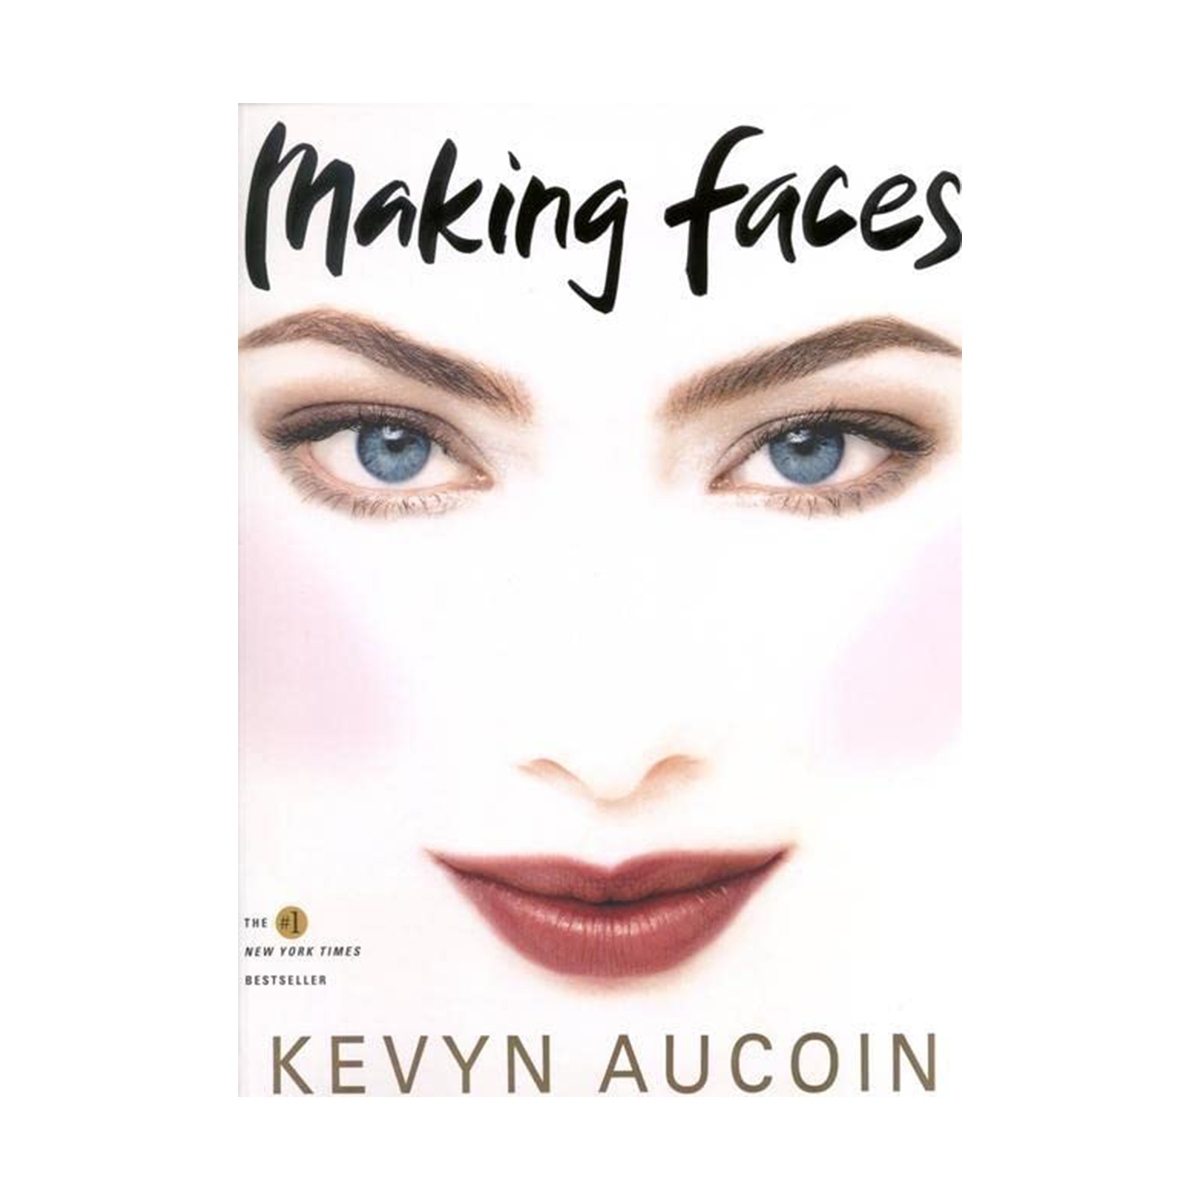 10 Makeup Books That Deserve a Spot on Your Coffee Table